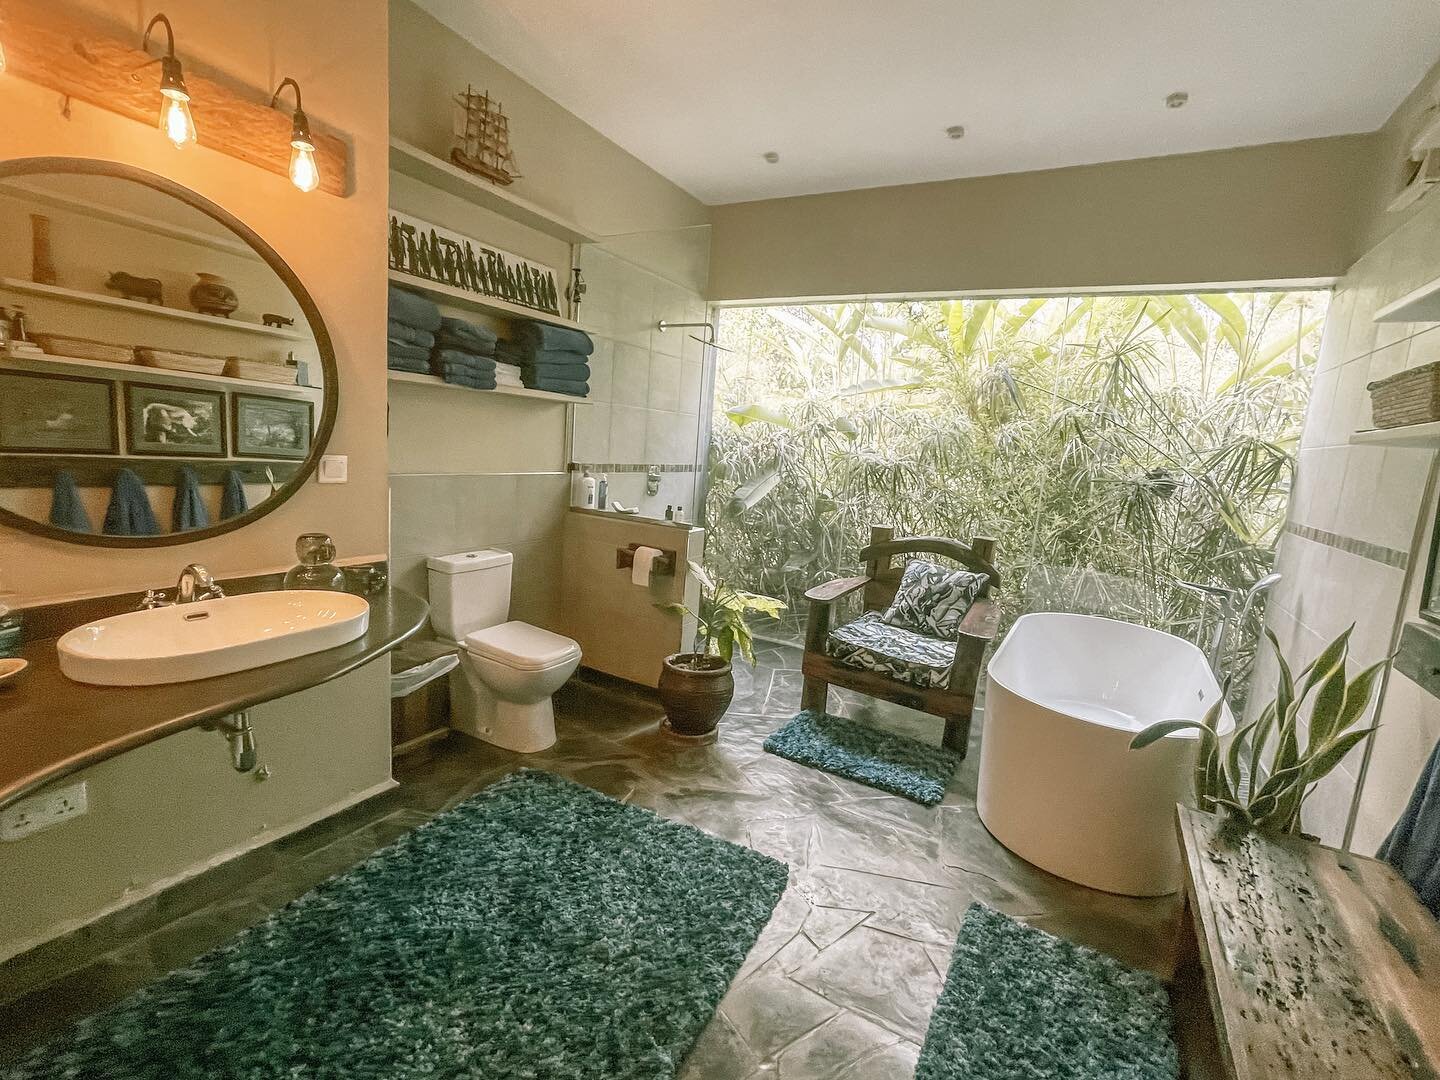 🌴Tropical bathroom vibes!
Our greenwood mirror accompanies this lush bathroom perfectly. 

How lucky to bathe with this view!